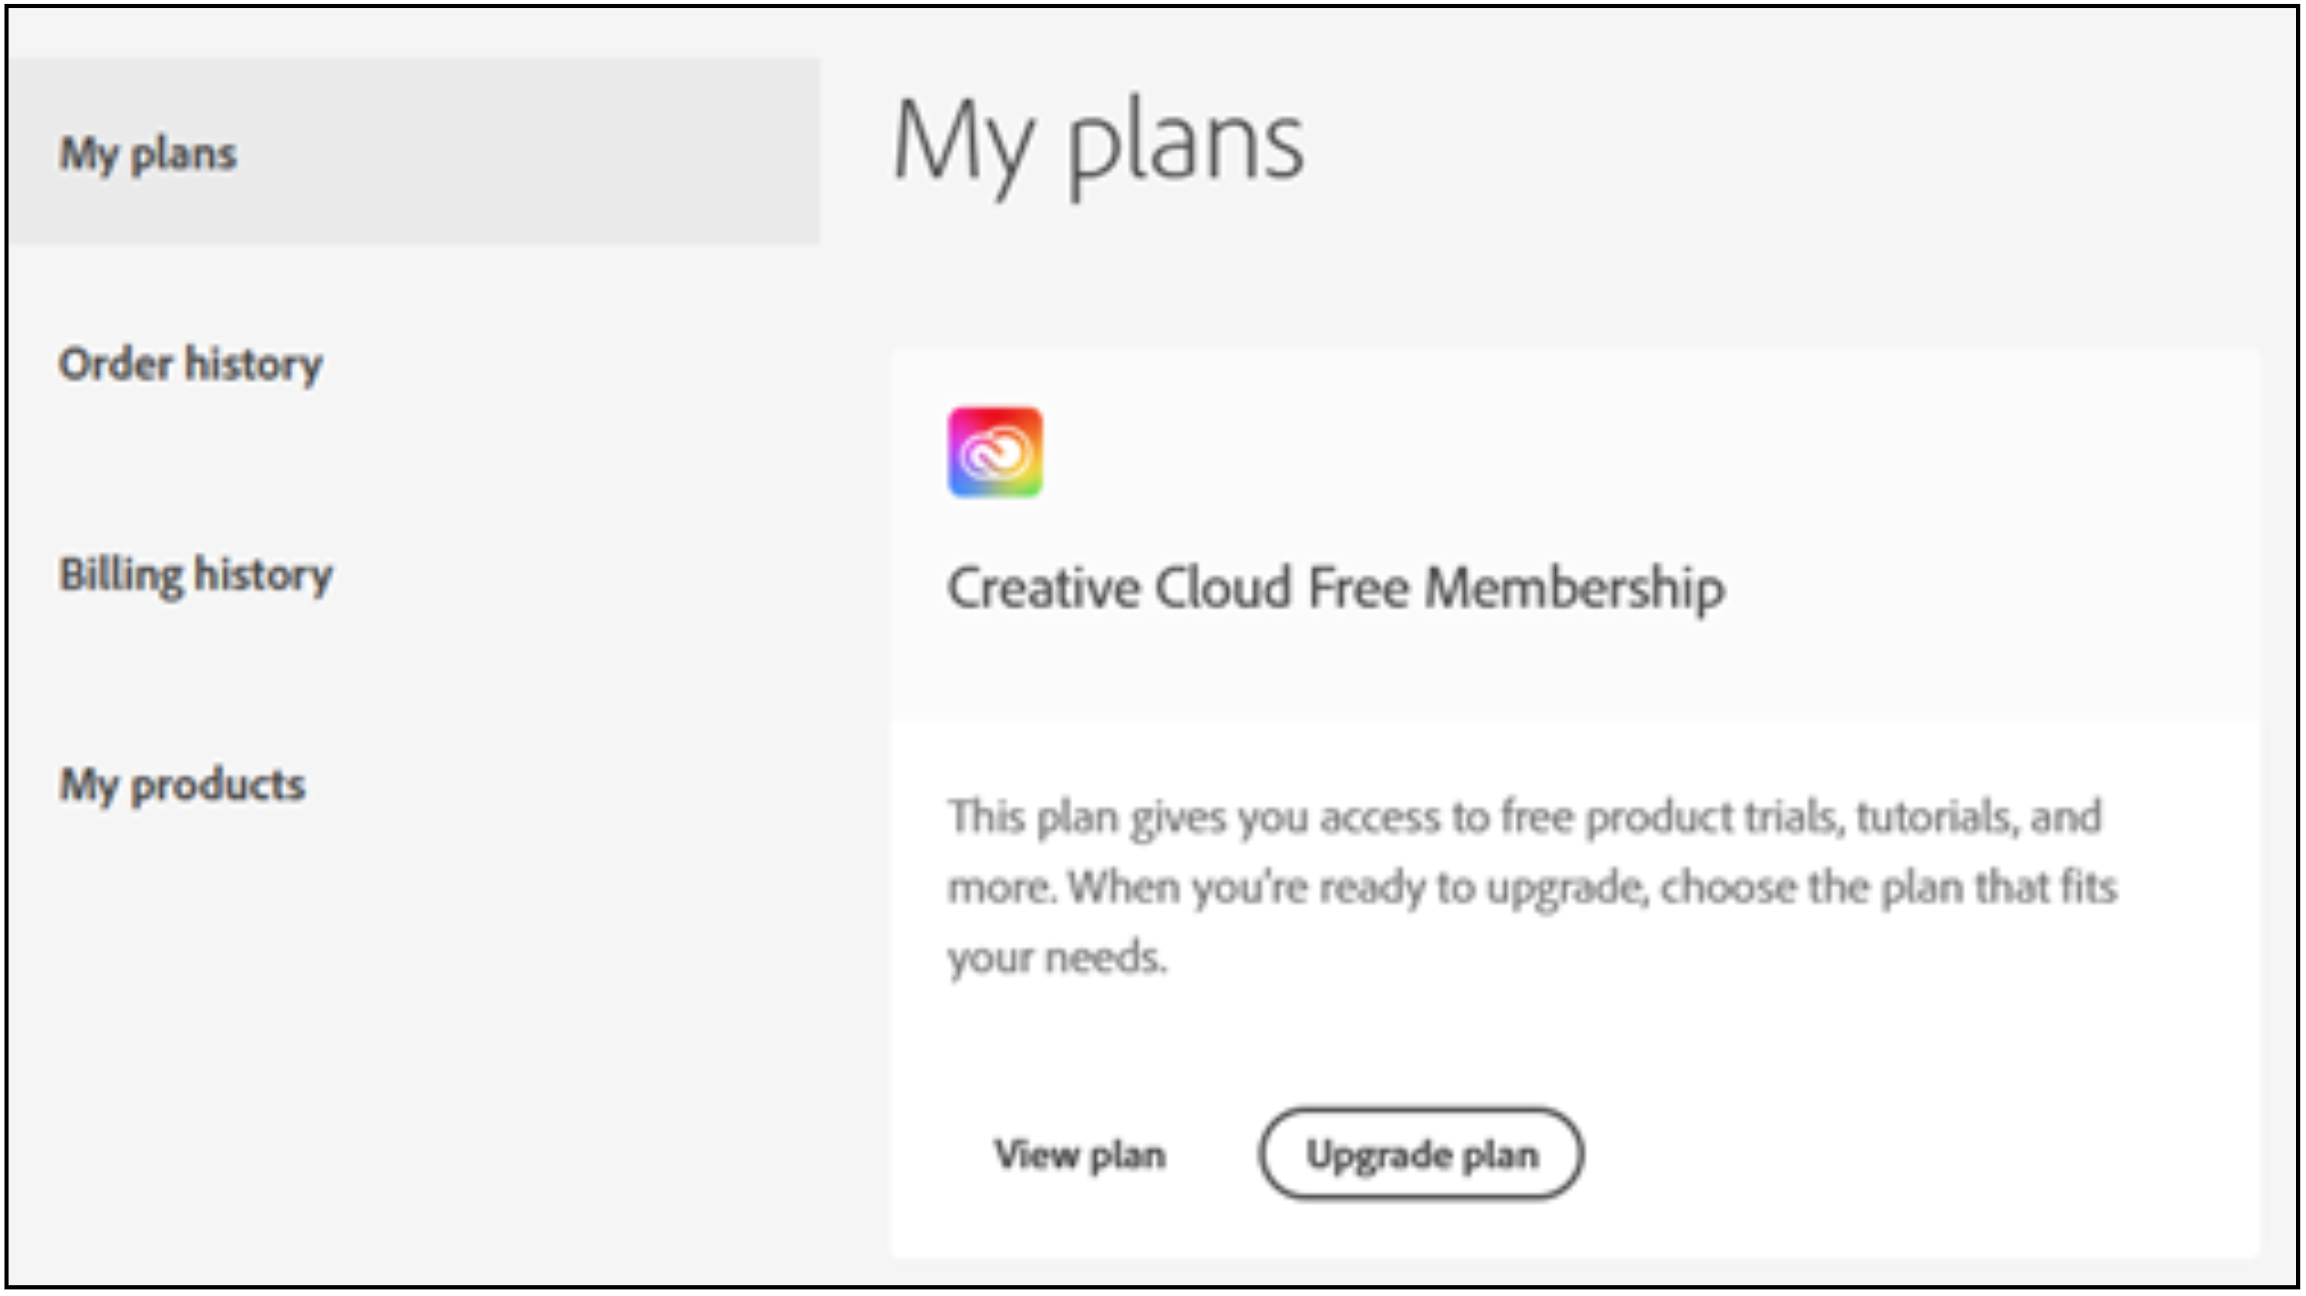 Adobe's my plans page allows the user to either view their plan or upgrade the same. The left side of the screen also lists the user's order history, billing history and my products. 